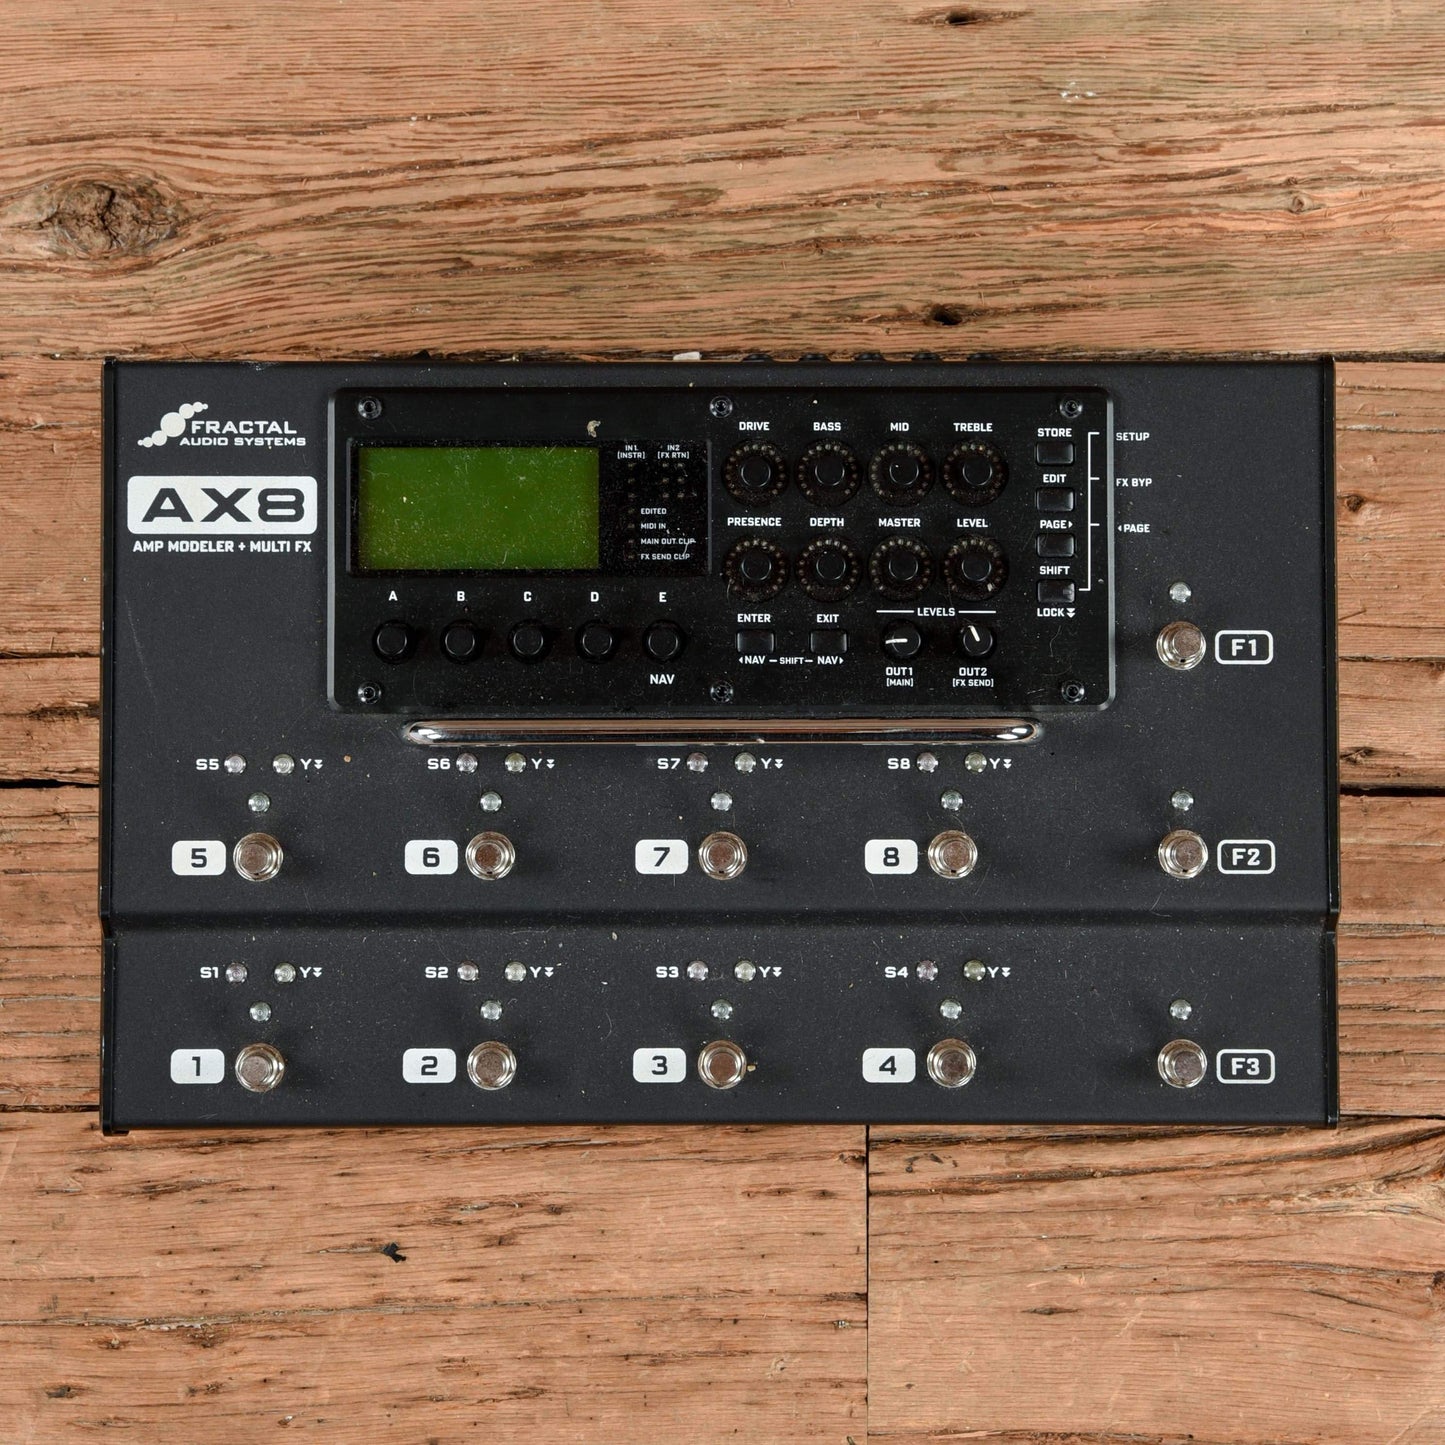 Fractal Audio Systems AX8 Amp Modeler/Multi-FX Processor  w/GB Effects and Pedals / Amp Modeling